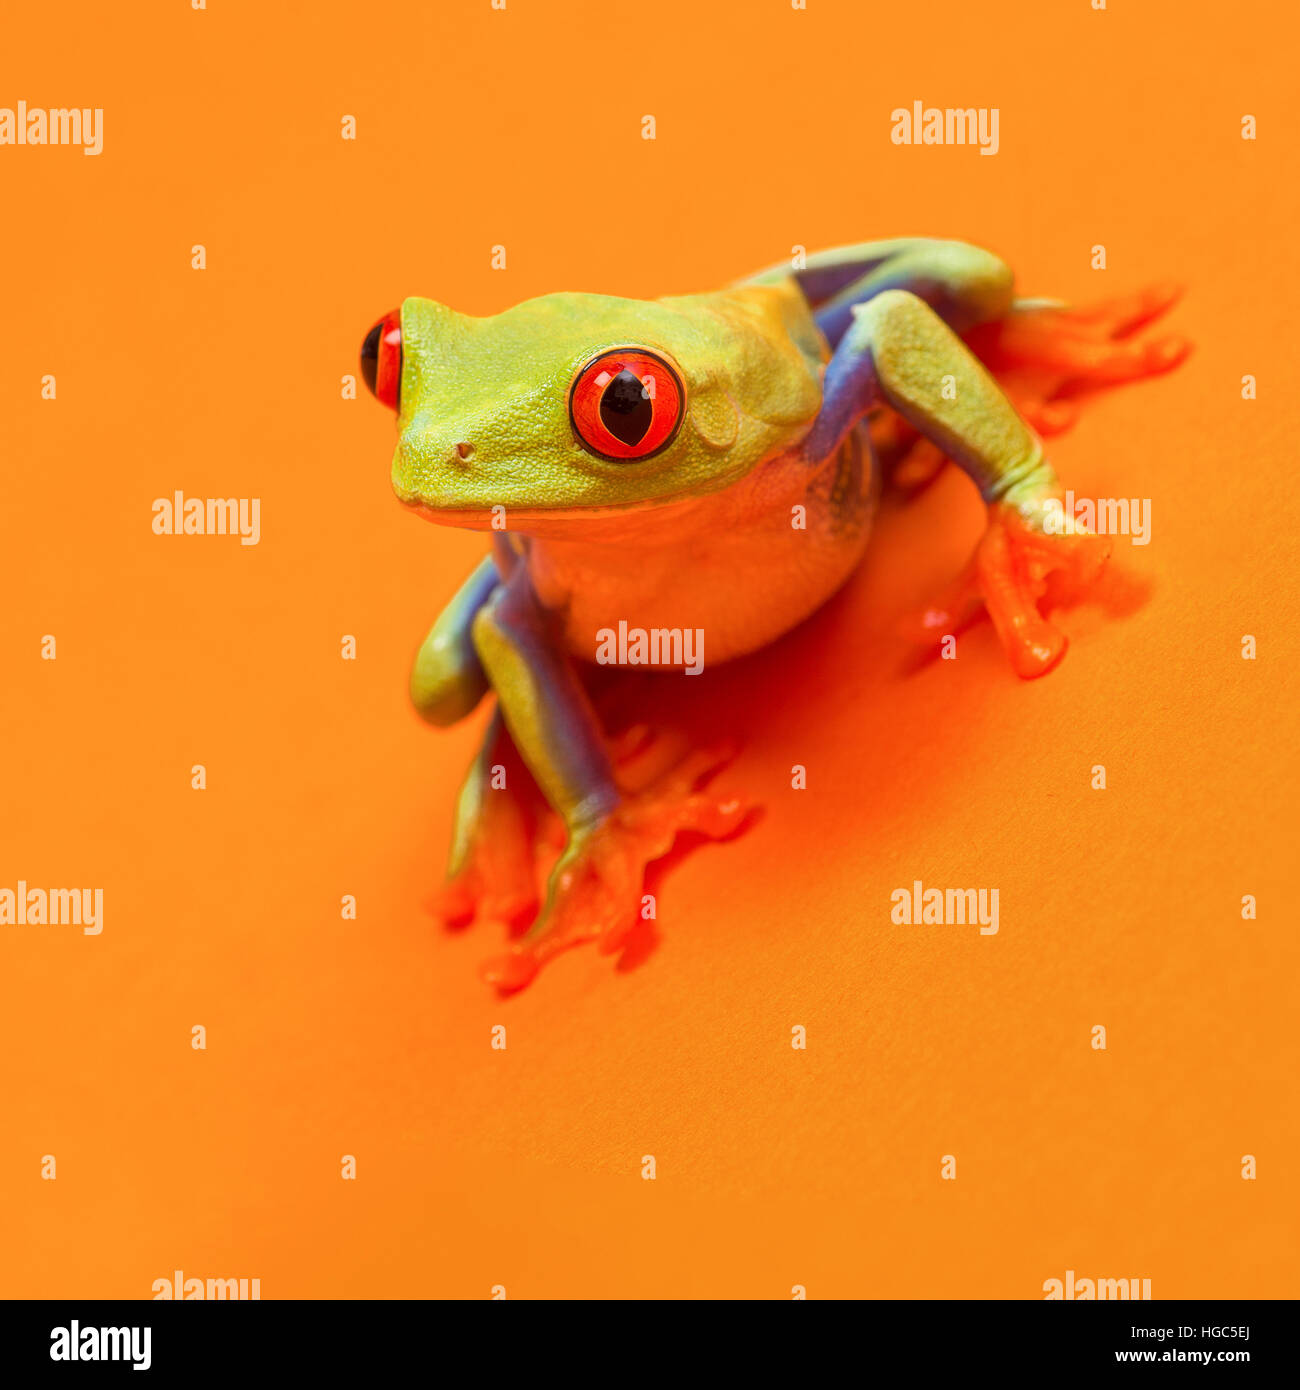 Red eyed tree frog with red eyes leaning forward on orange background ready to jump Stock Photo